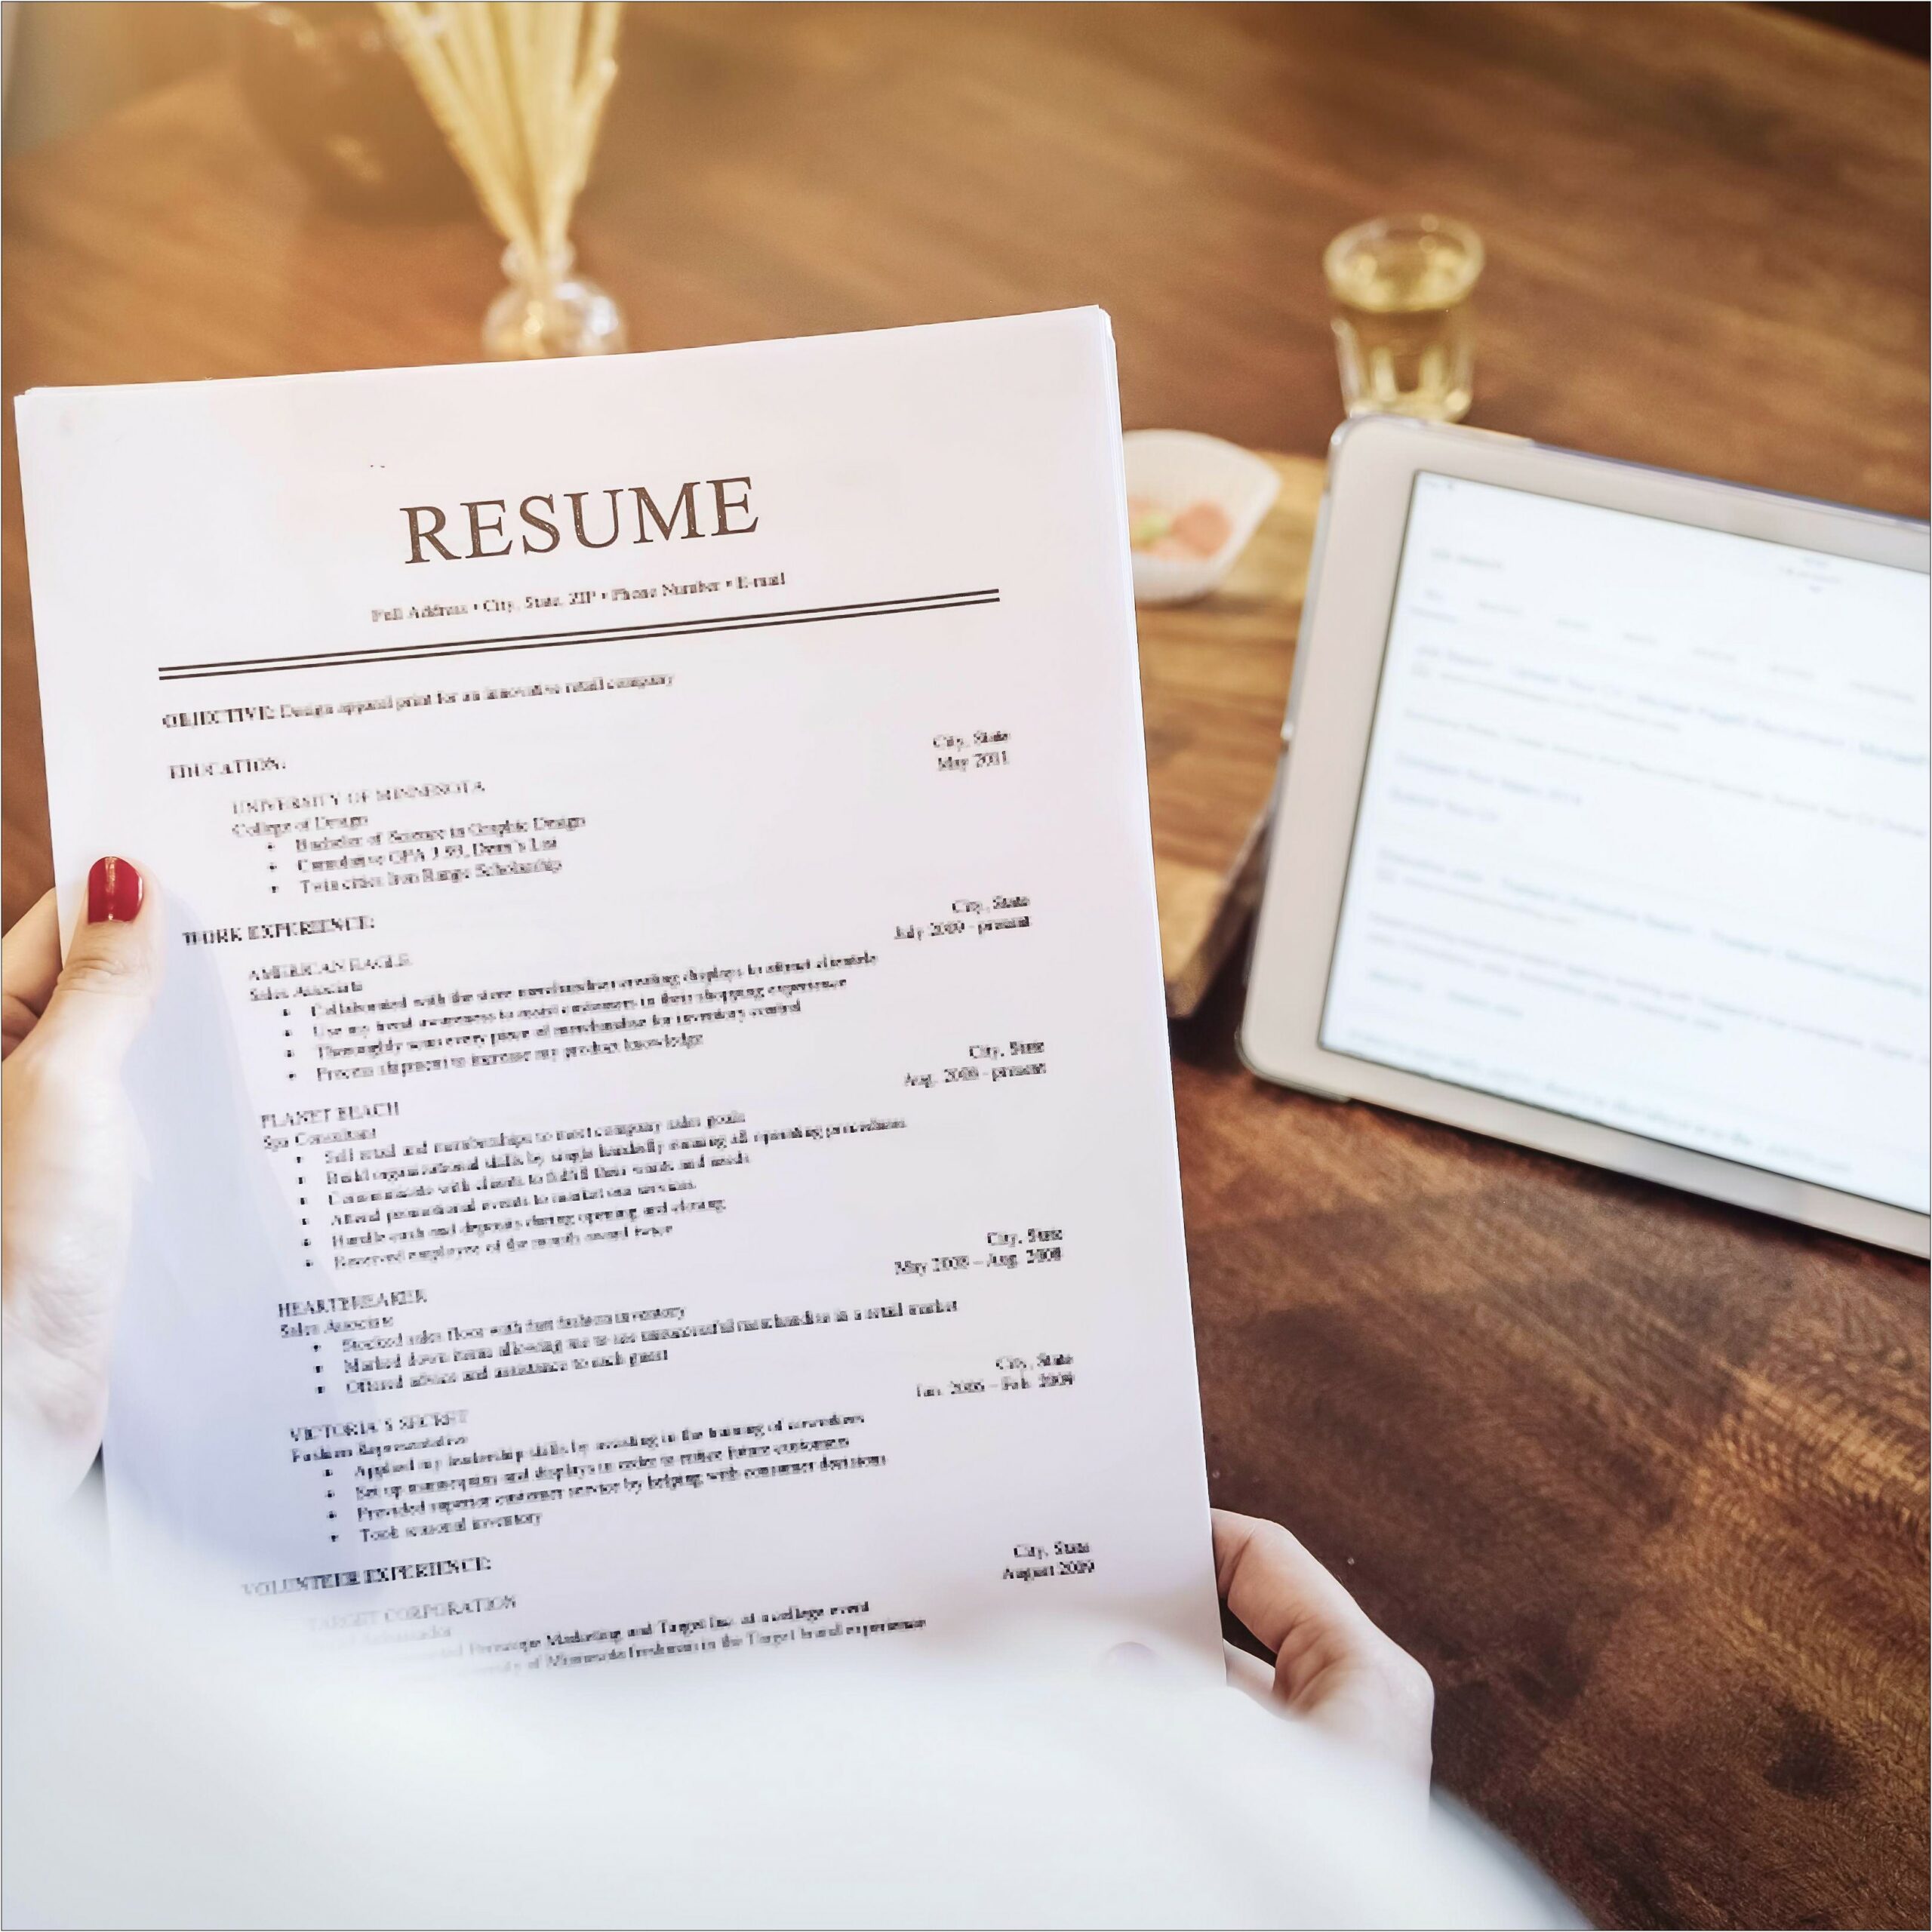 Jobs That Doesn't Require Resume Or Interviews